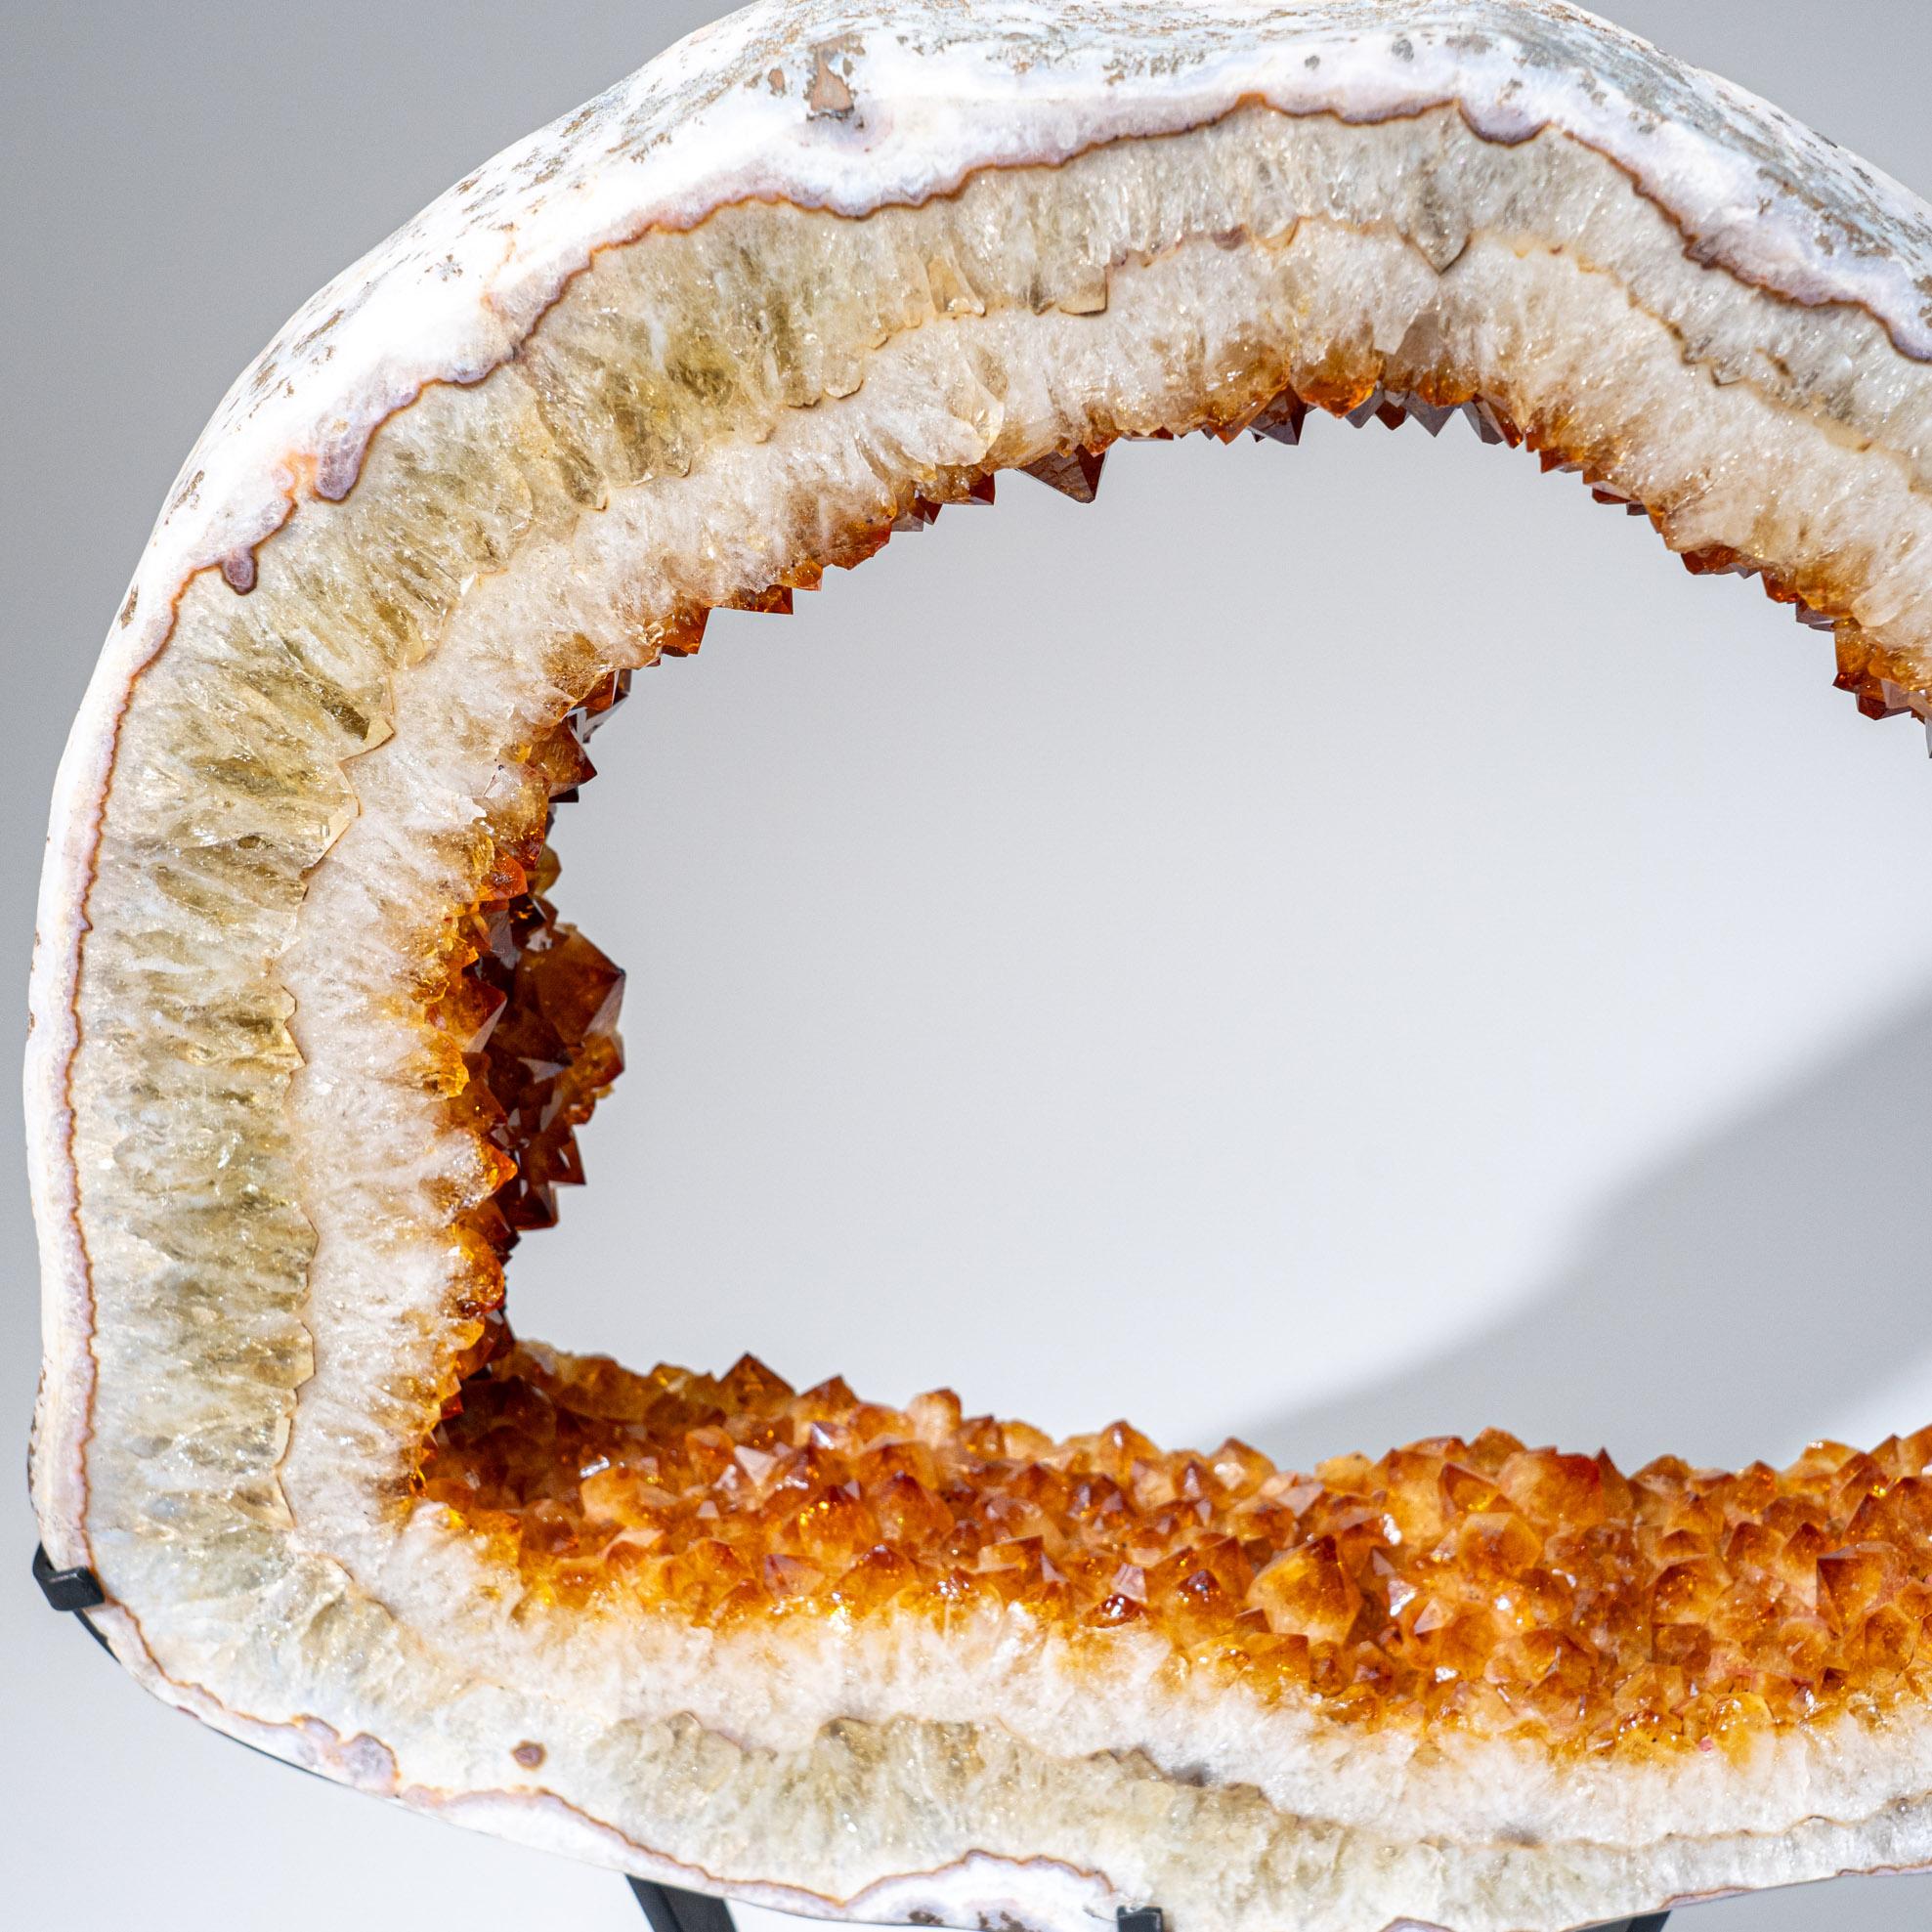 Precisely sliced cross-section of a Citrine geode from Brazil. This specimen showcases a full lining of radiant, golden quartz crystals and features vibrant orange and yellow hues with brilliantly shiny terminated faces. The entire slice is expertly